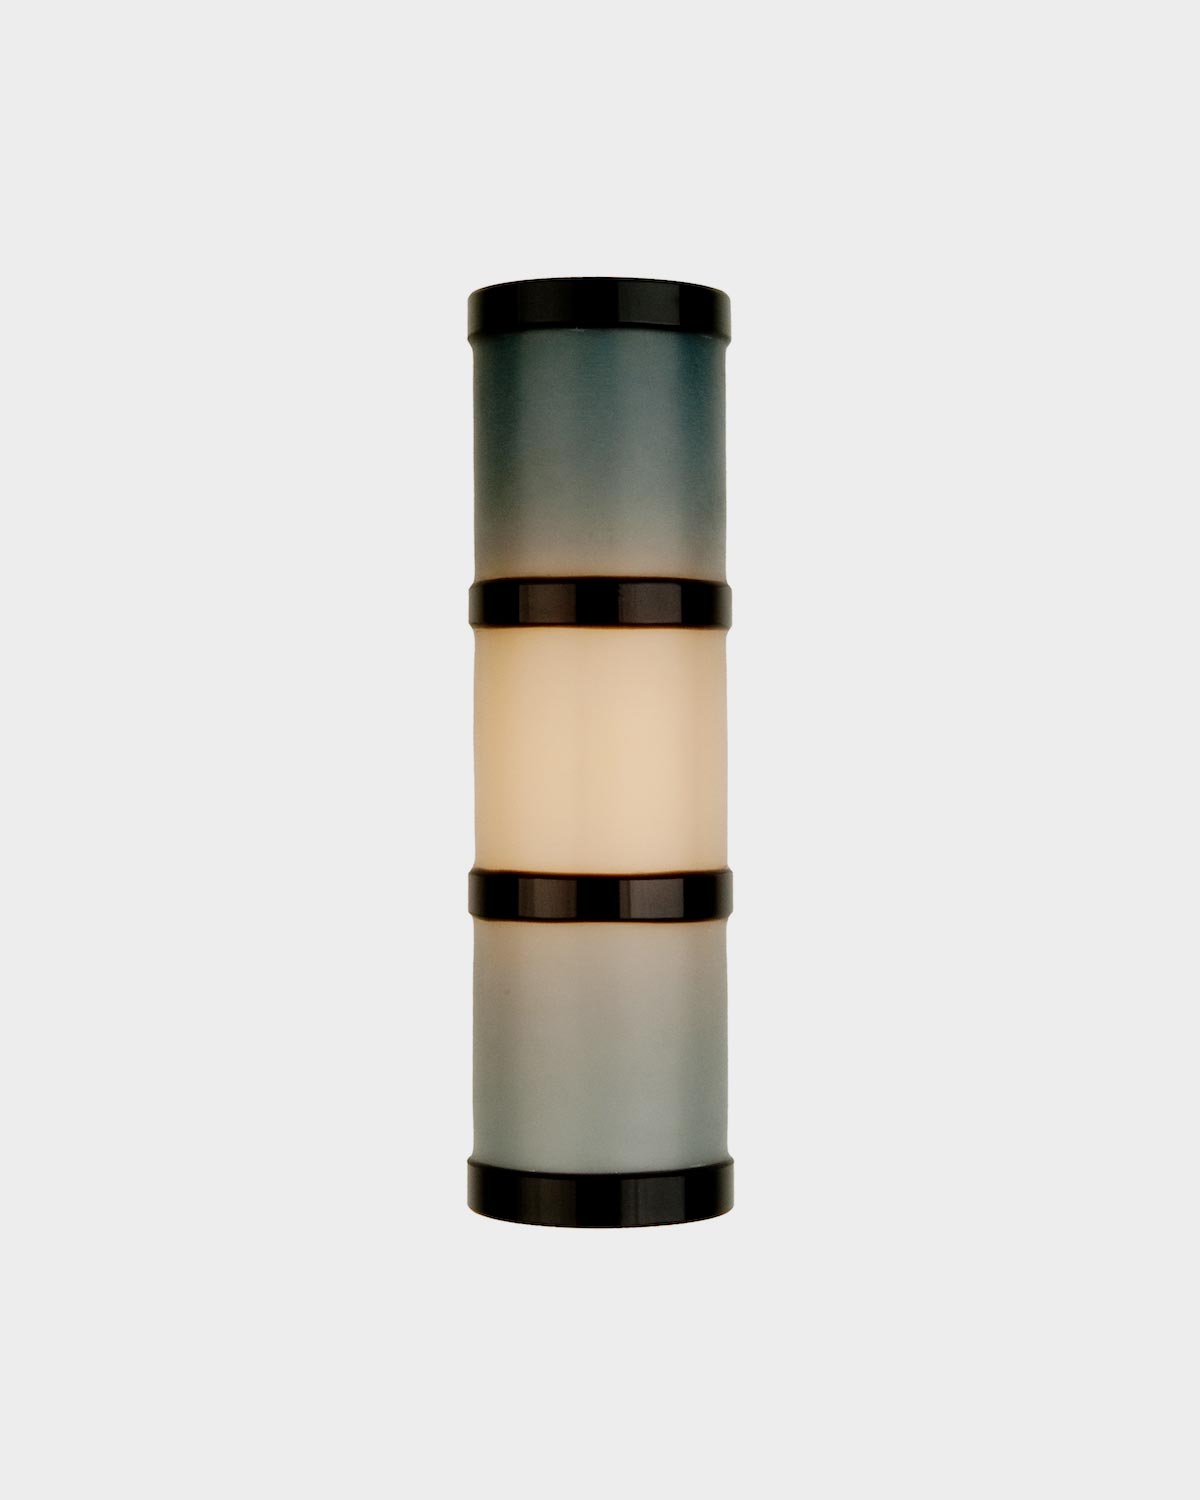 The Murene Wall Sconce by Veronese